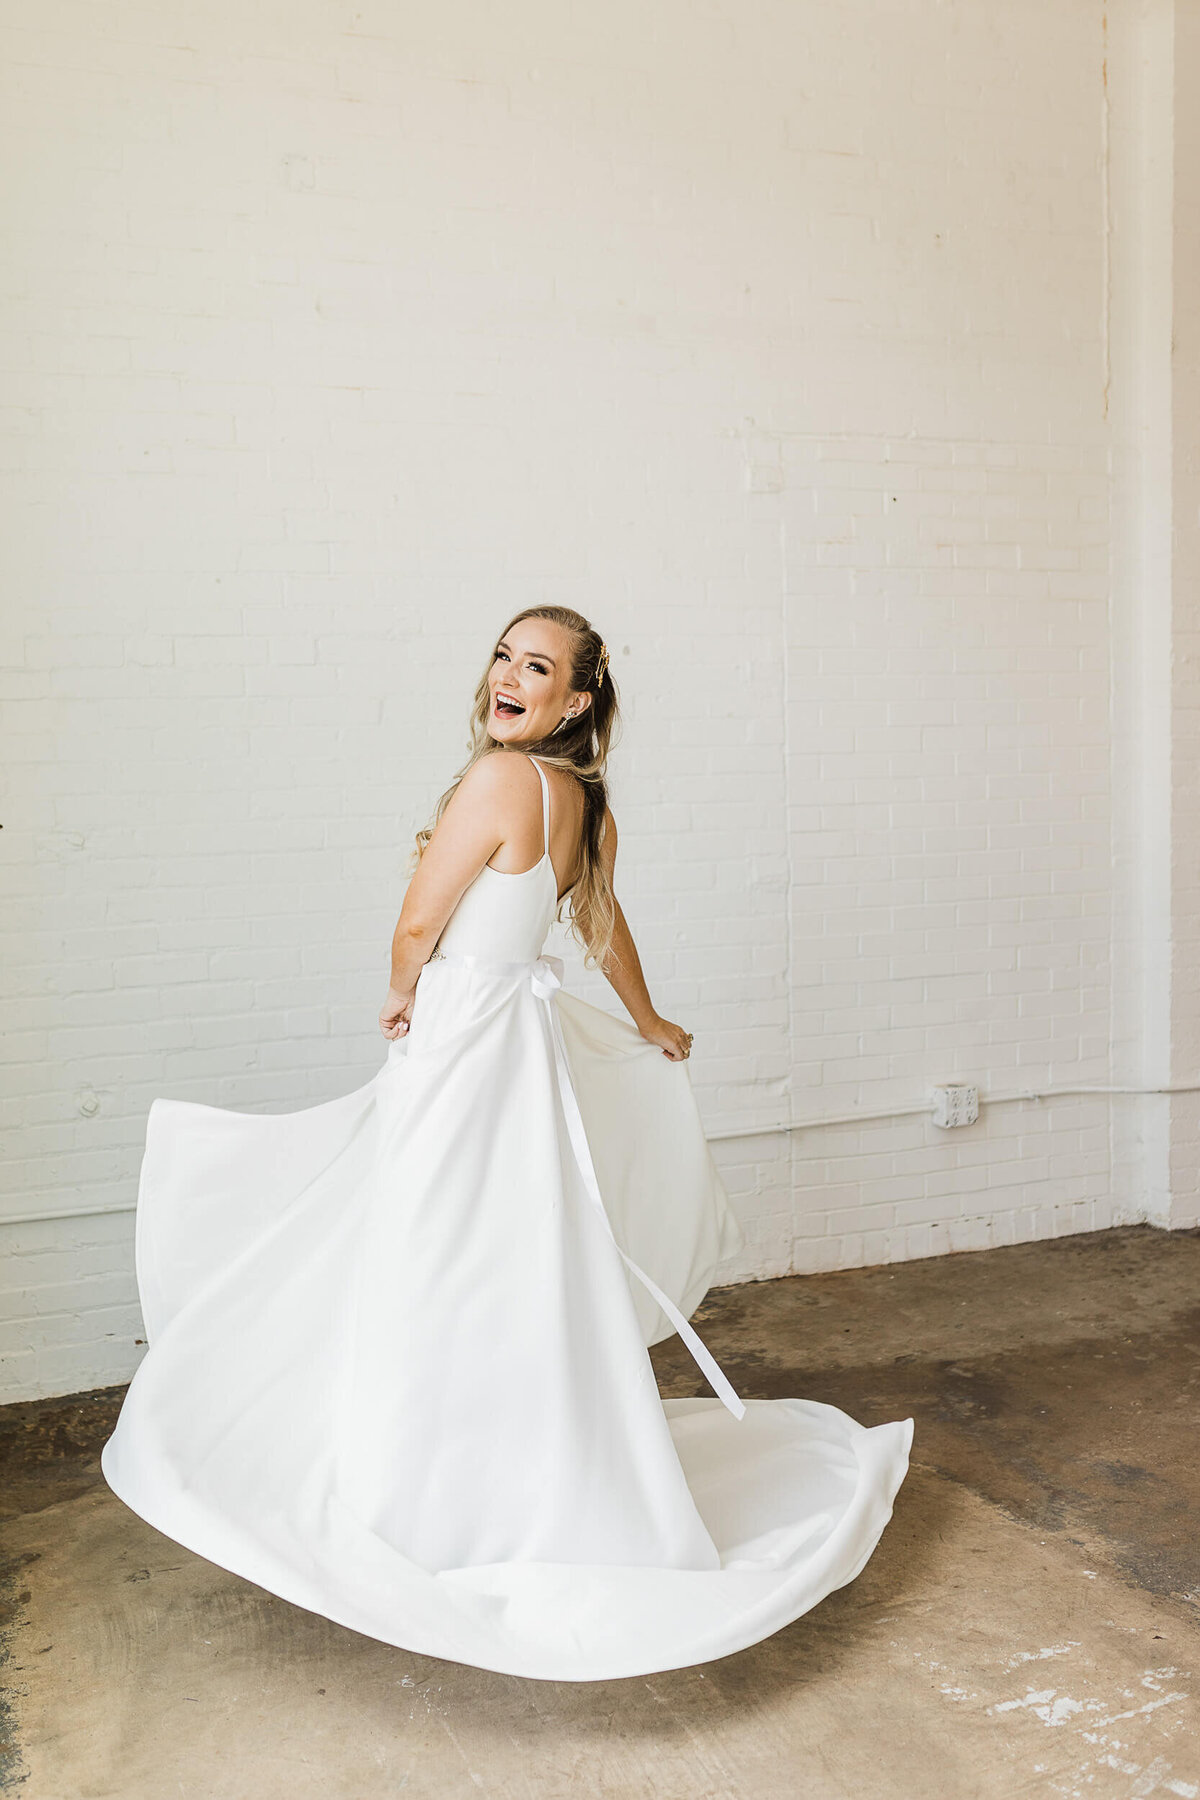 Bridal session with A and Bé Bridal Shop wedding dress in Dallas, TX